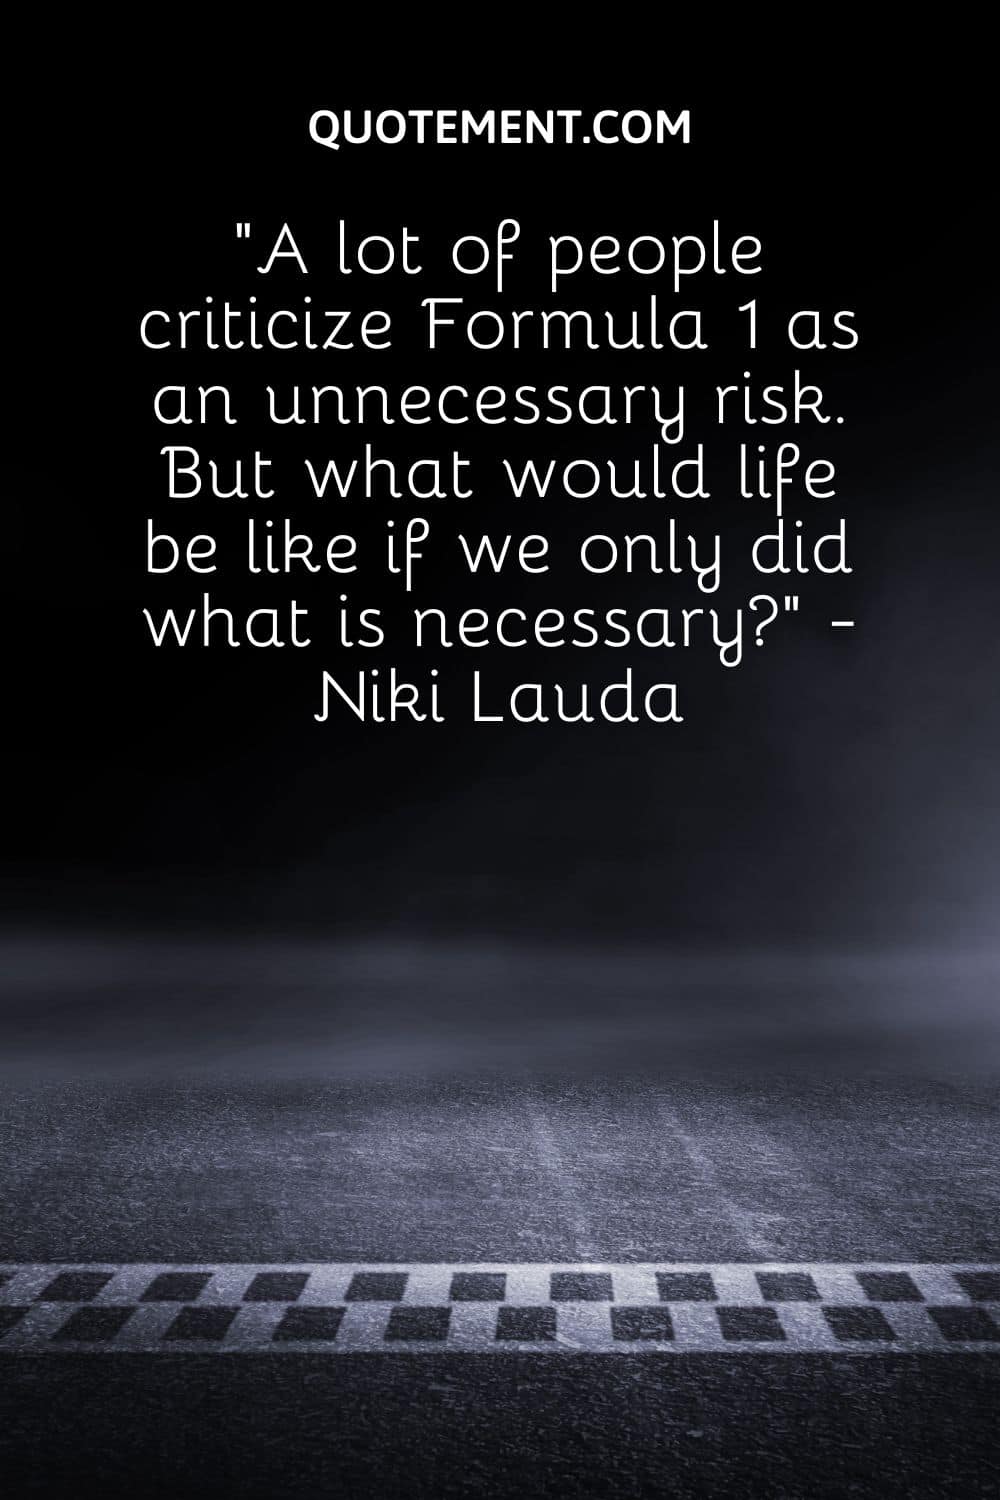 A lot of people criticize Formula 1 as an unnecessary risk. But what would life be like if we only did what is necessary